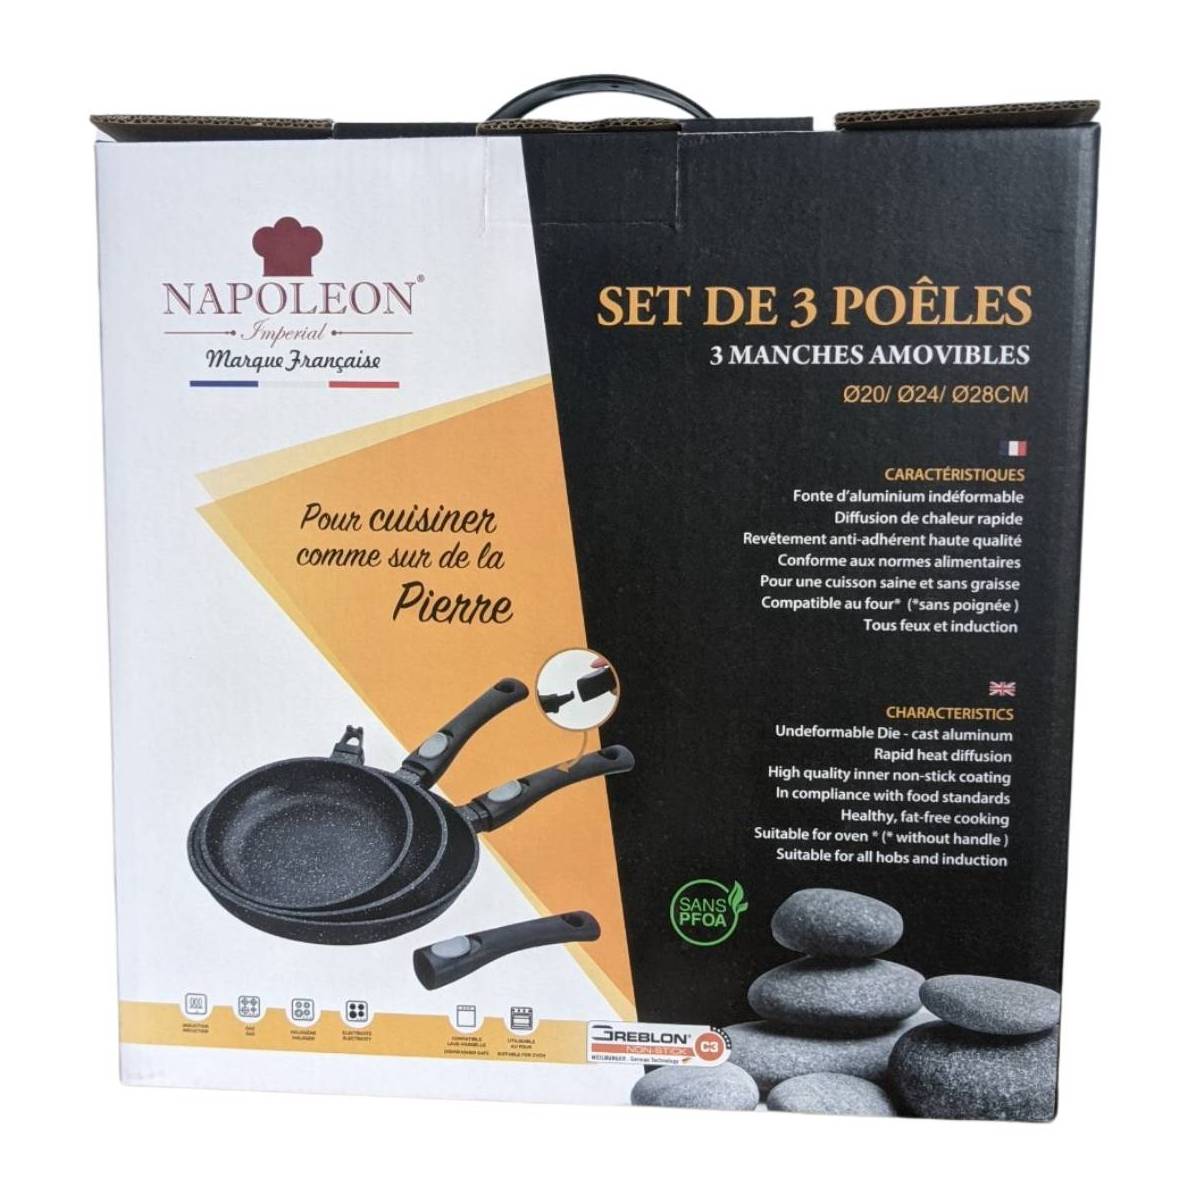 Set of 3 Napoleon Imperial removable pans